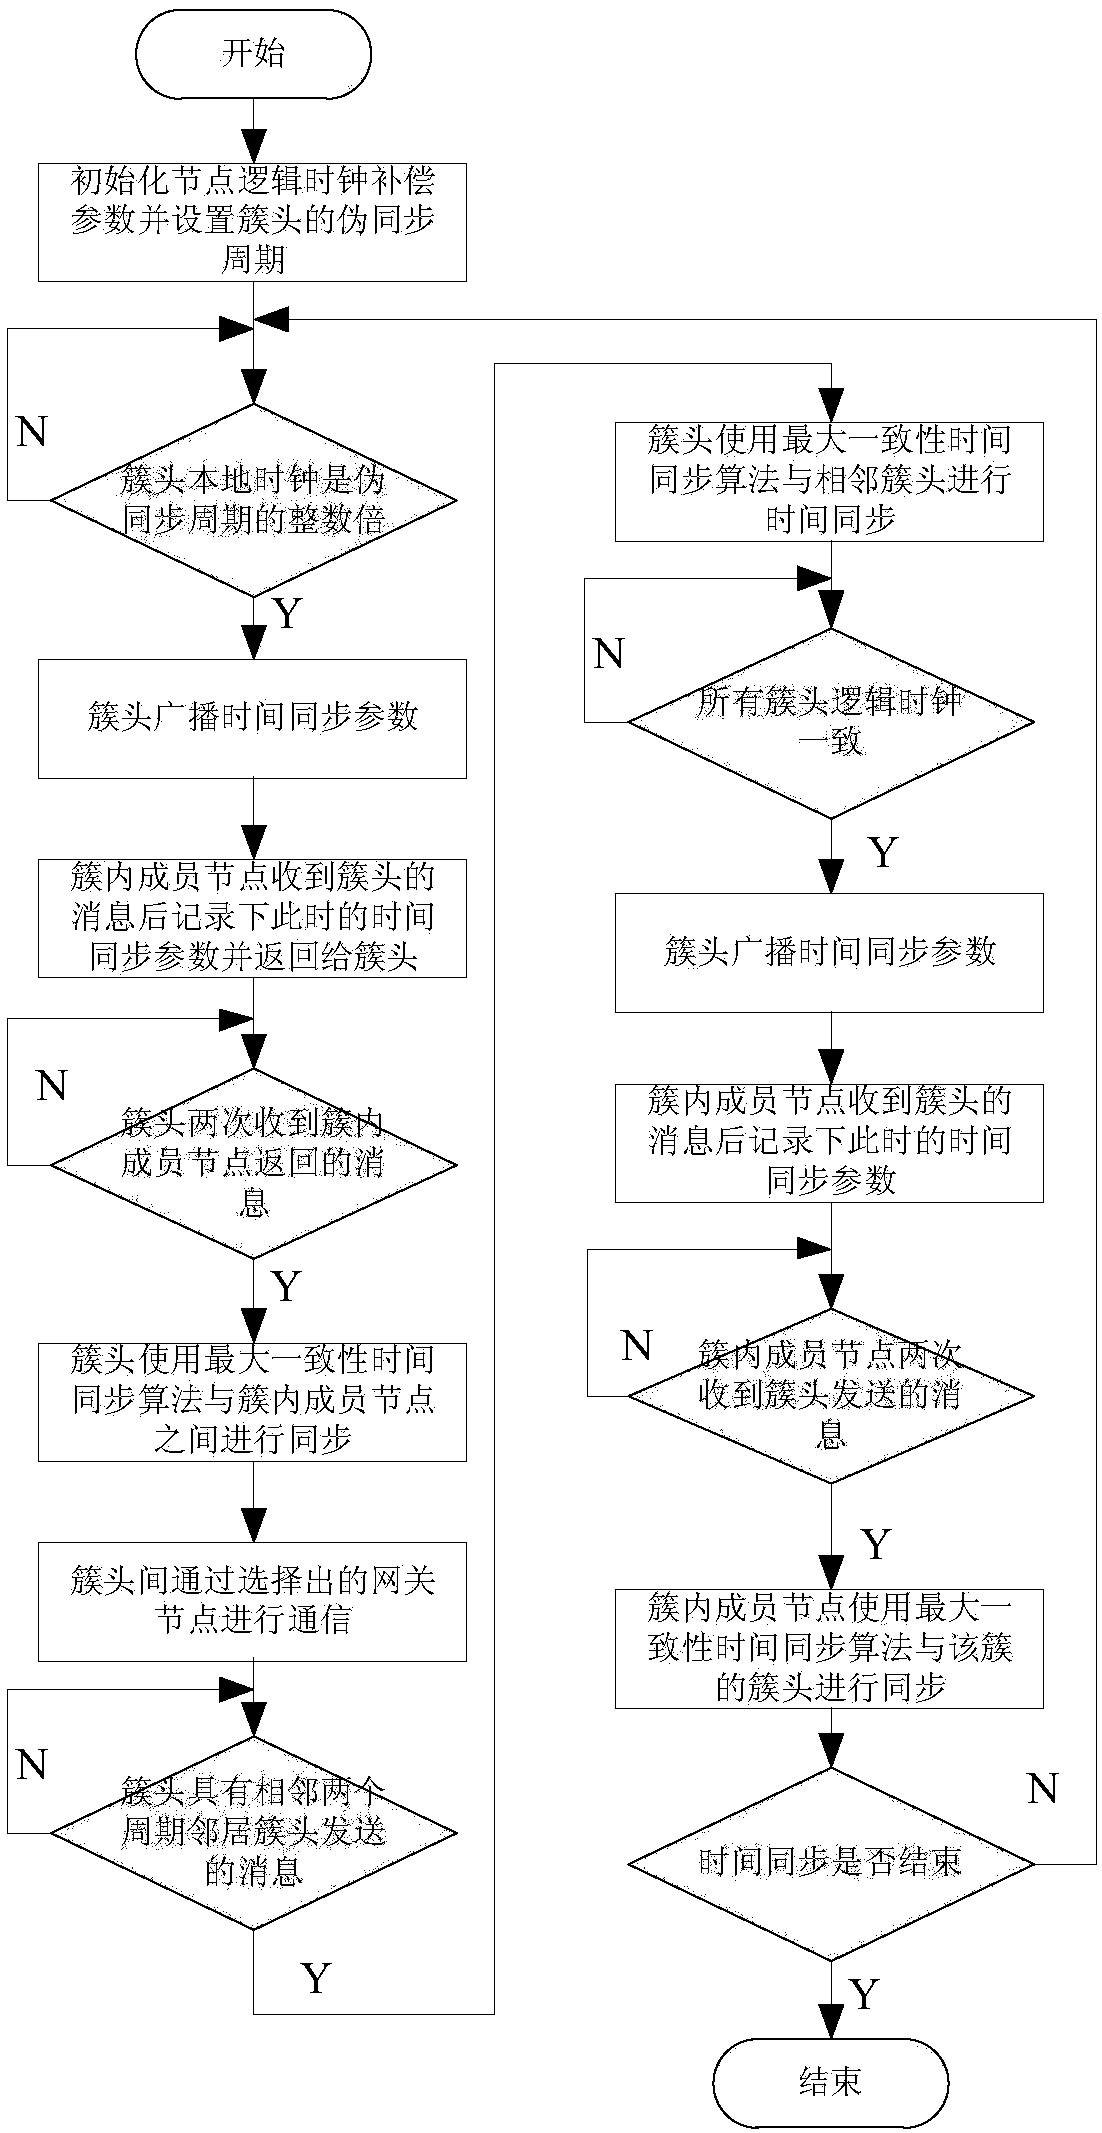 Wireless sensor network consistency time synchronization method for reducing network traffic